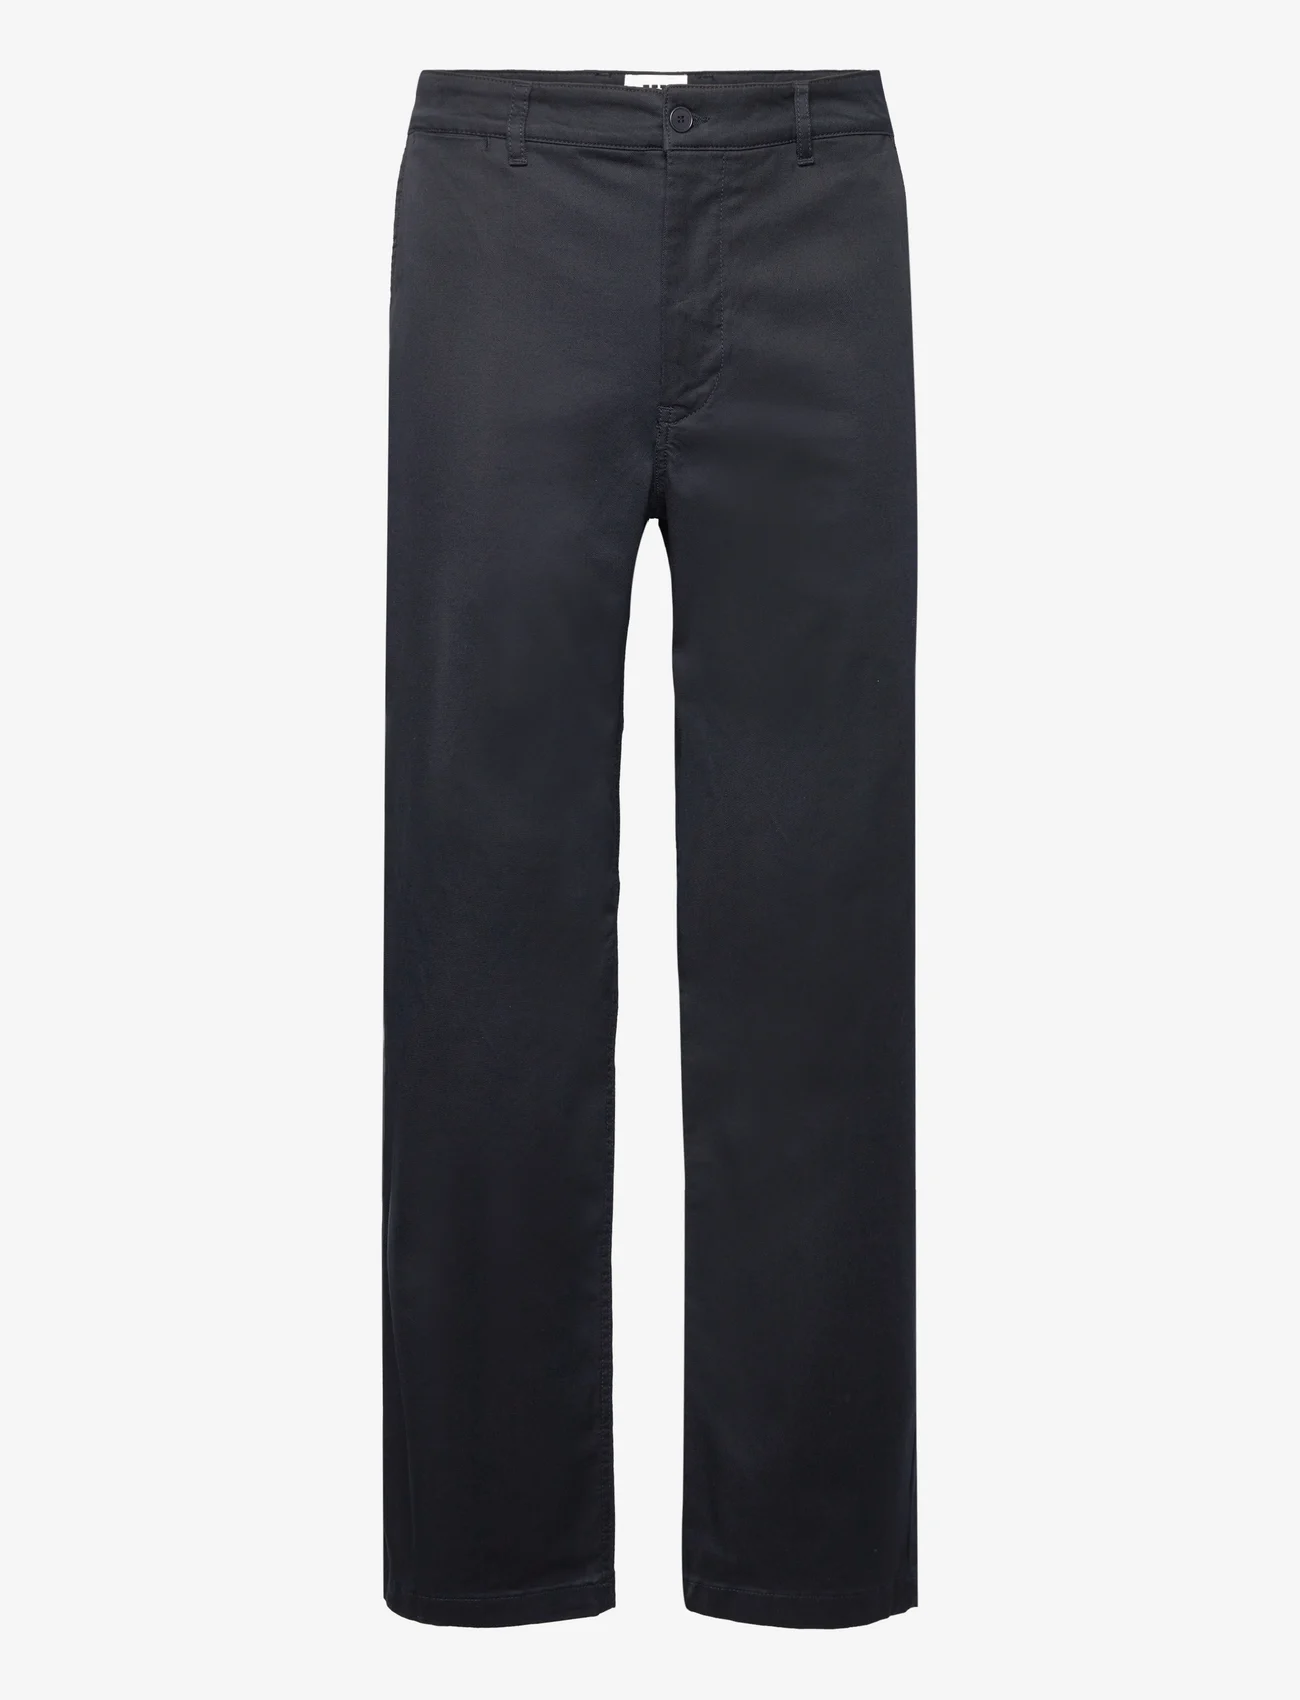 Double A by Wood Wood - Silas classic trousers - chinos - navy - 0